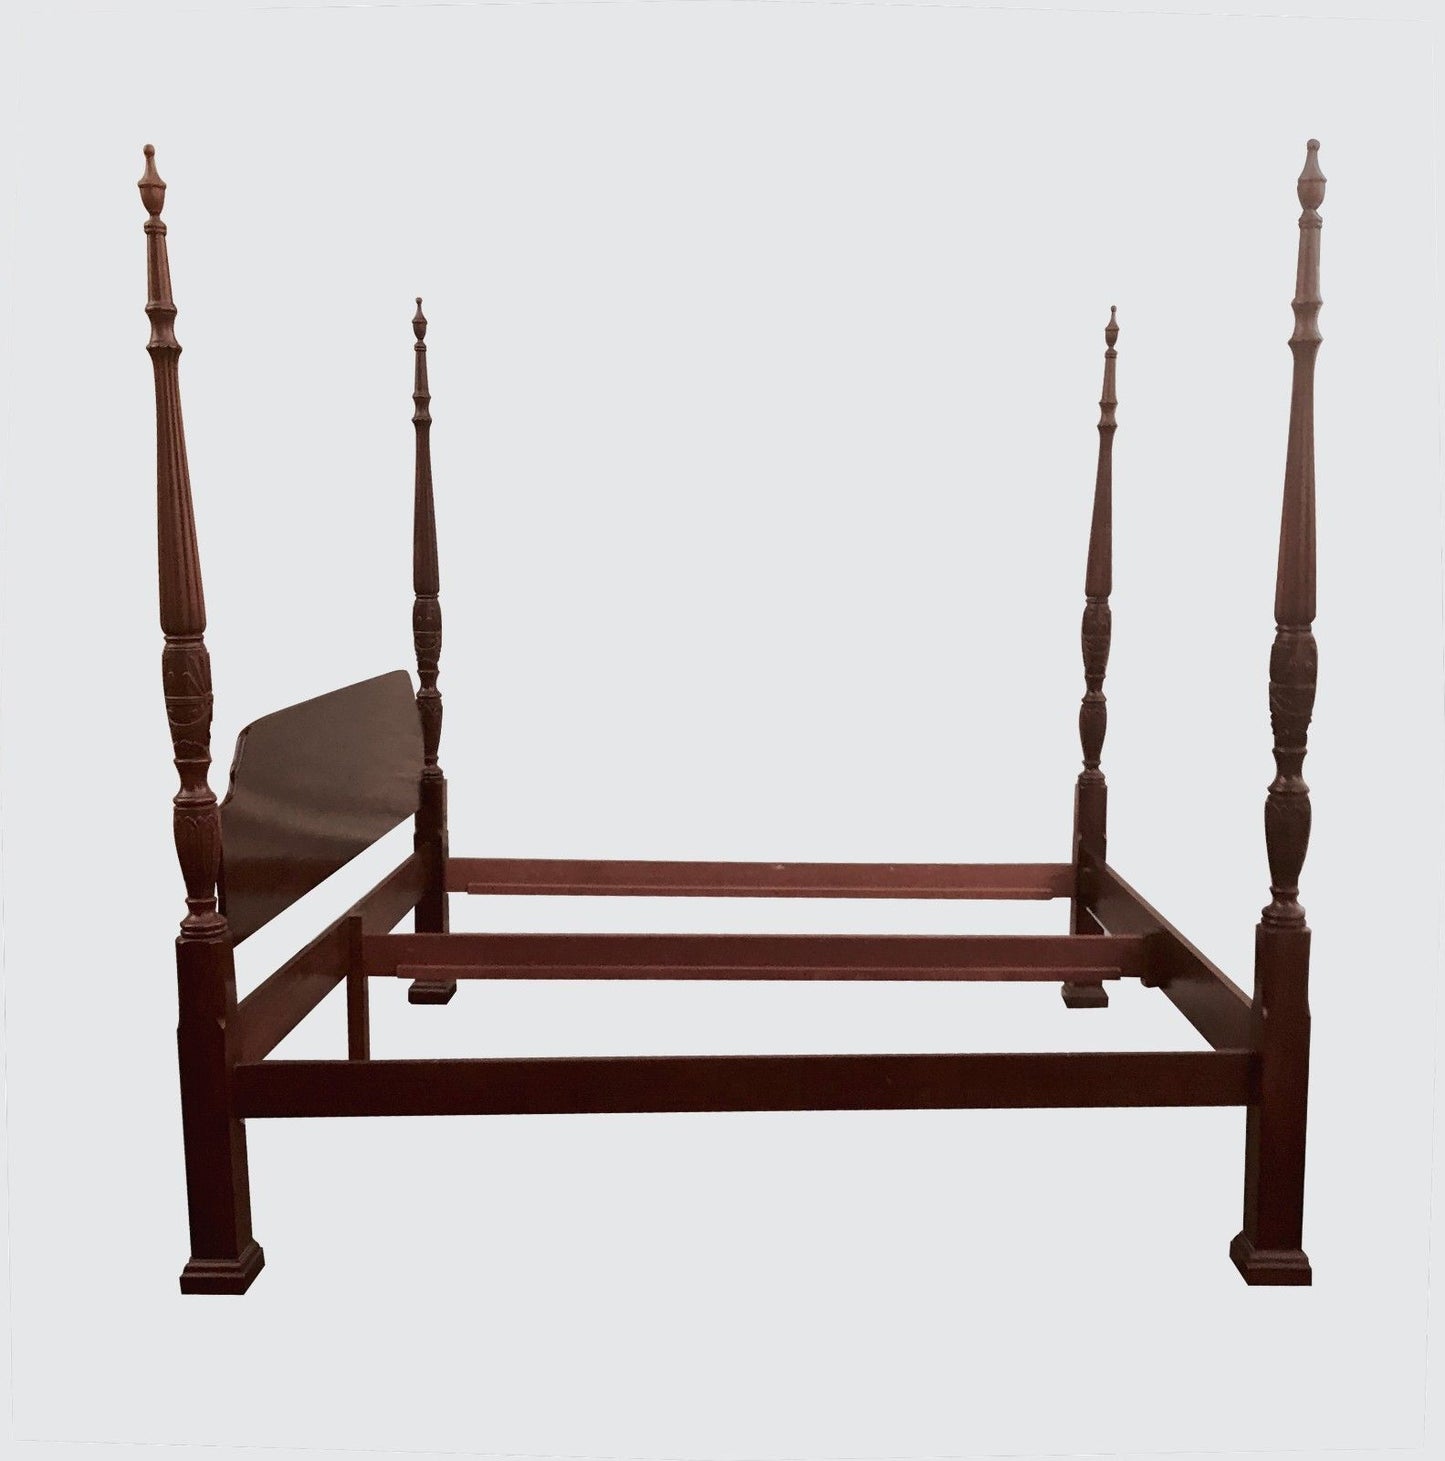 KING SIZED CHERRY FOUR POSTER RICE CARVED PLANTATION CHIPPENDALE STYLED BED